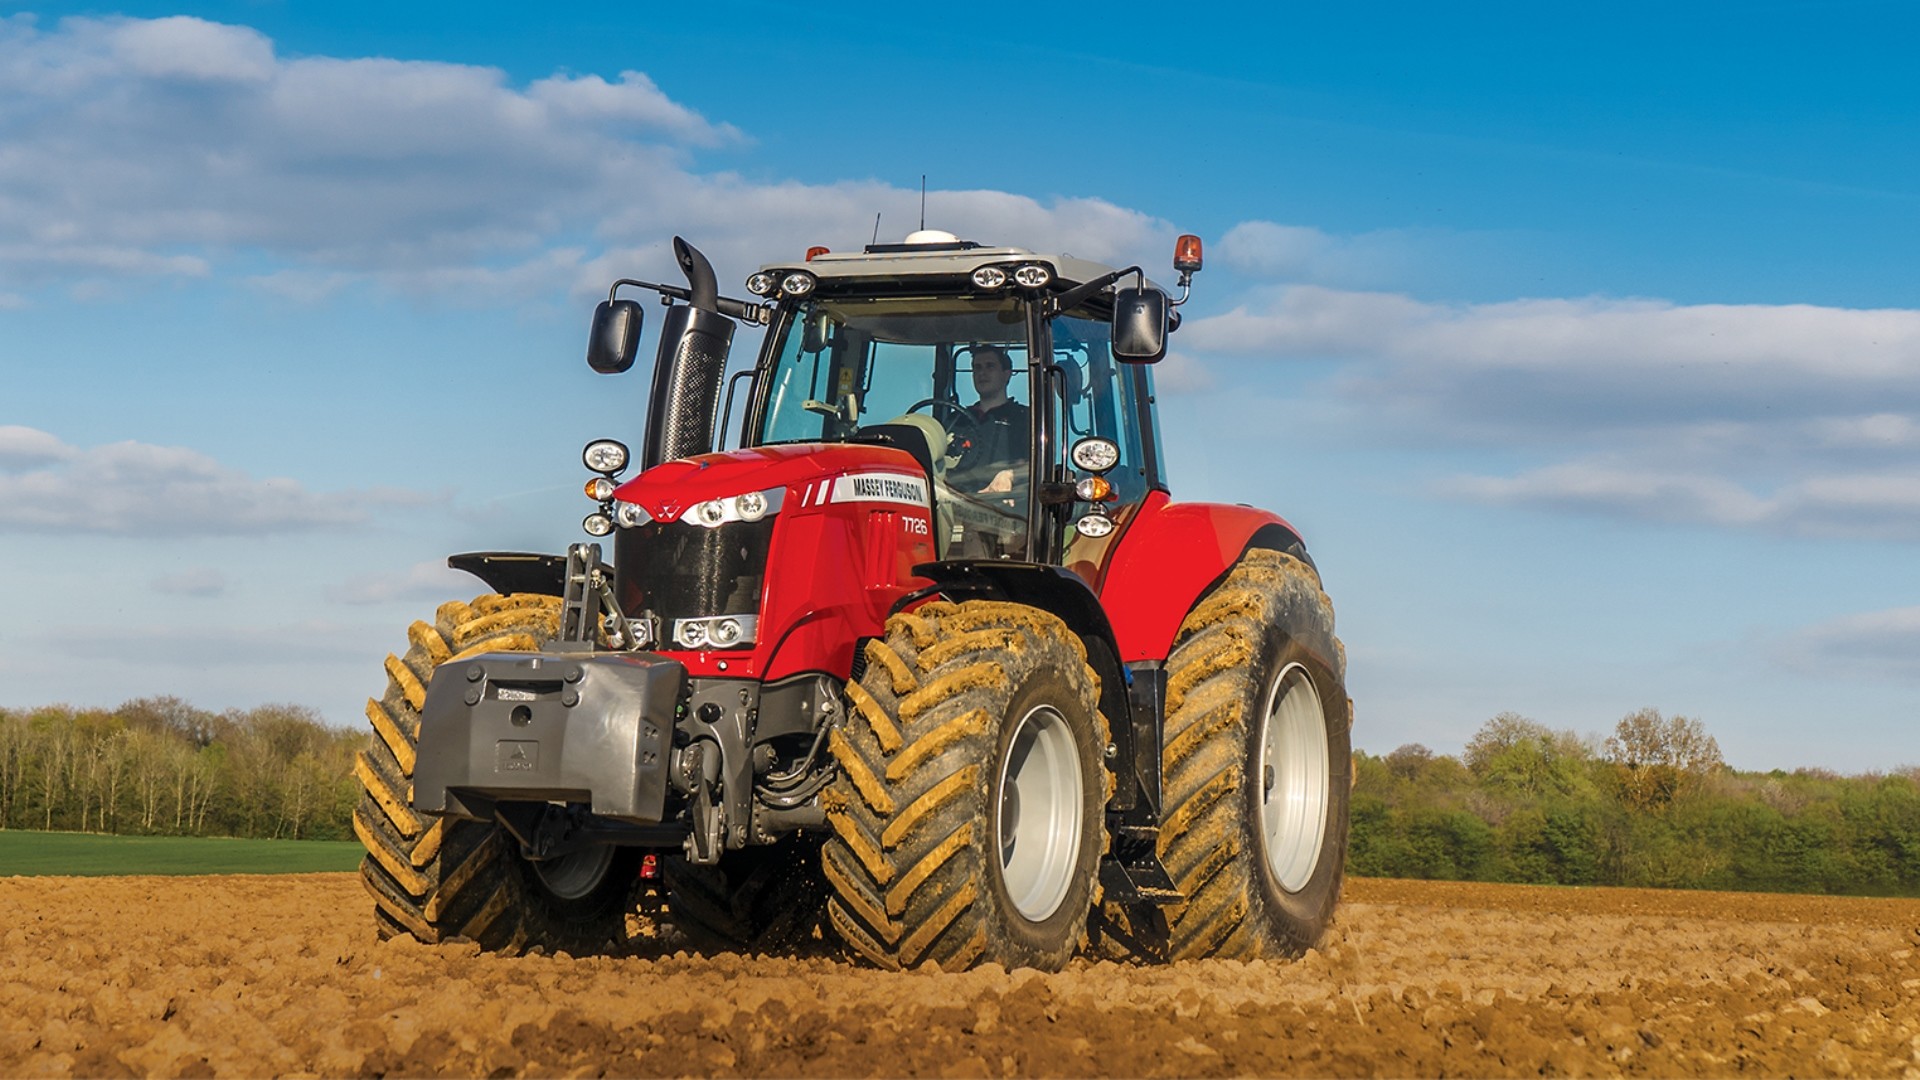 traktor wallpaper,land vehicle,tractor,vehicle,agricultural machinery,field